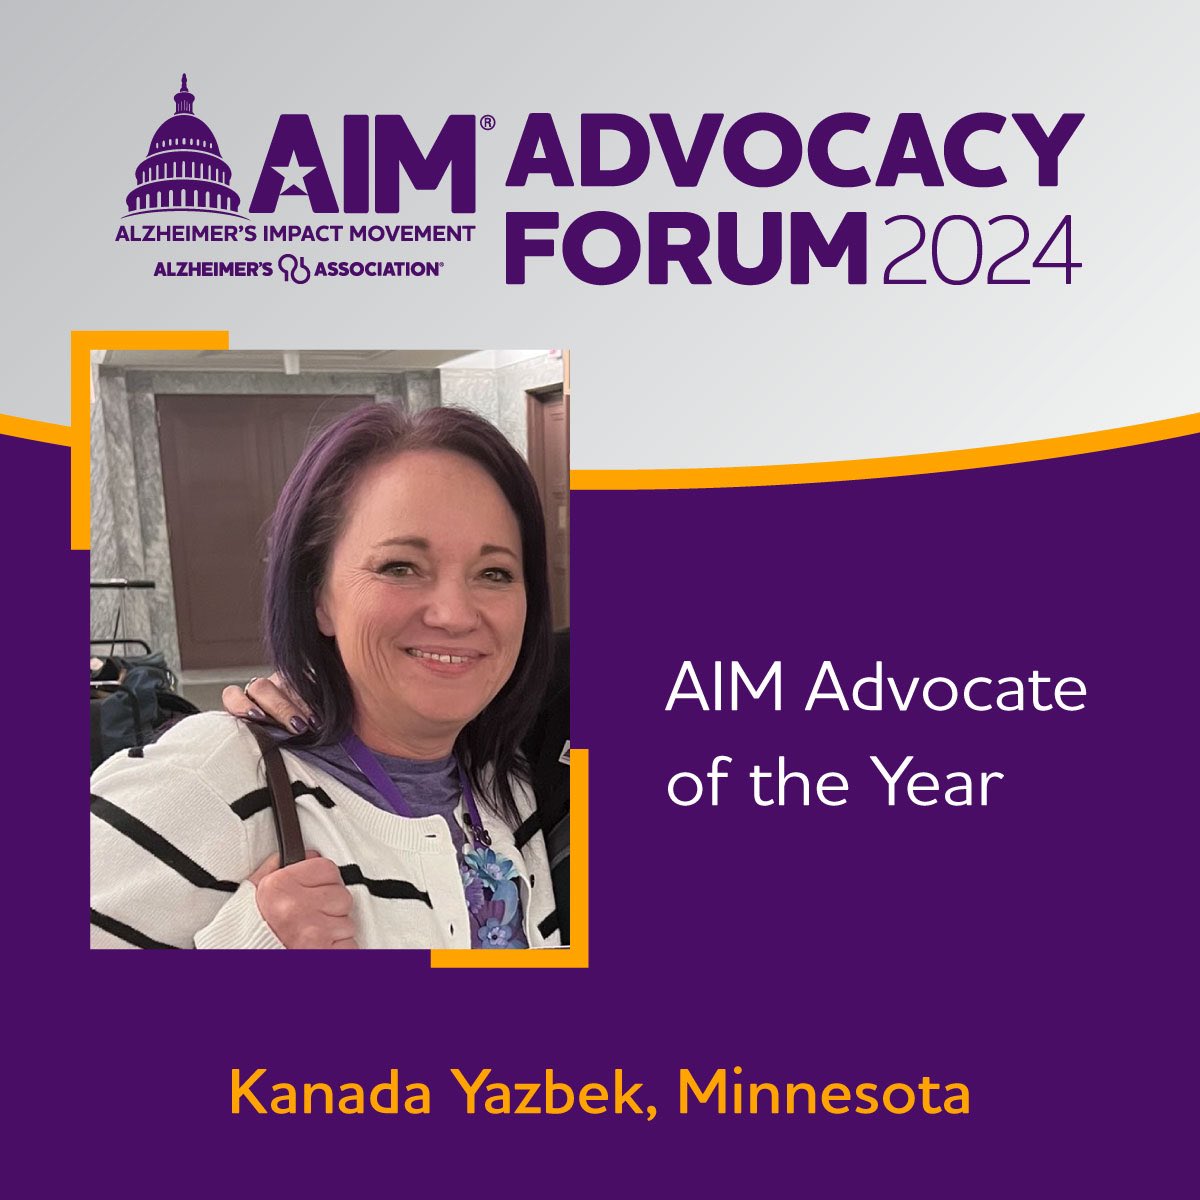 Congratulations to @lifewithmci from @alzMNND for being named an Advocate of the Year at #alzforum! We cannot thank you enough for bravely sharing your experience and for speaking up for those affected by Alzheimer’s and all other dementia. #alzforum